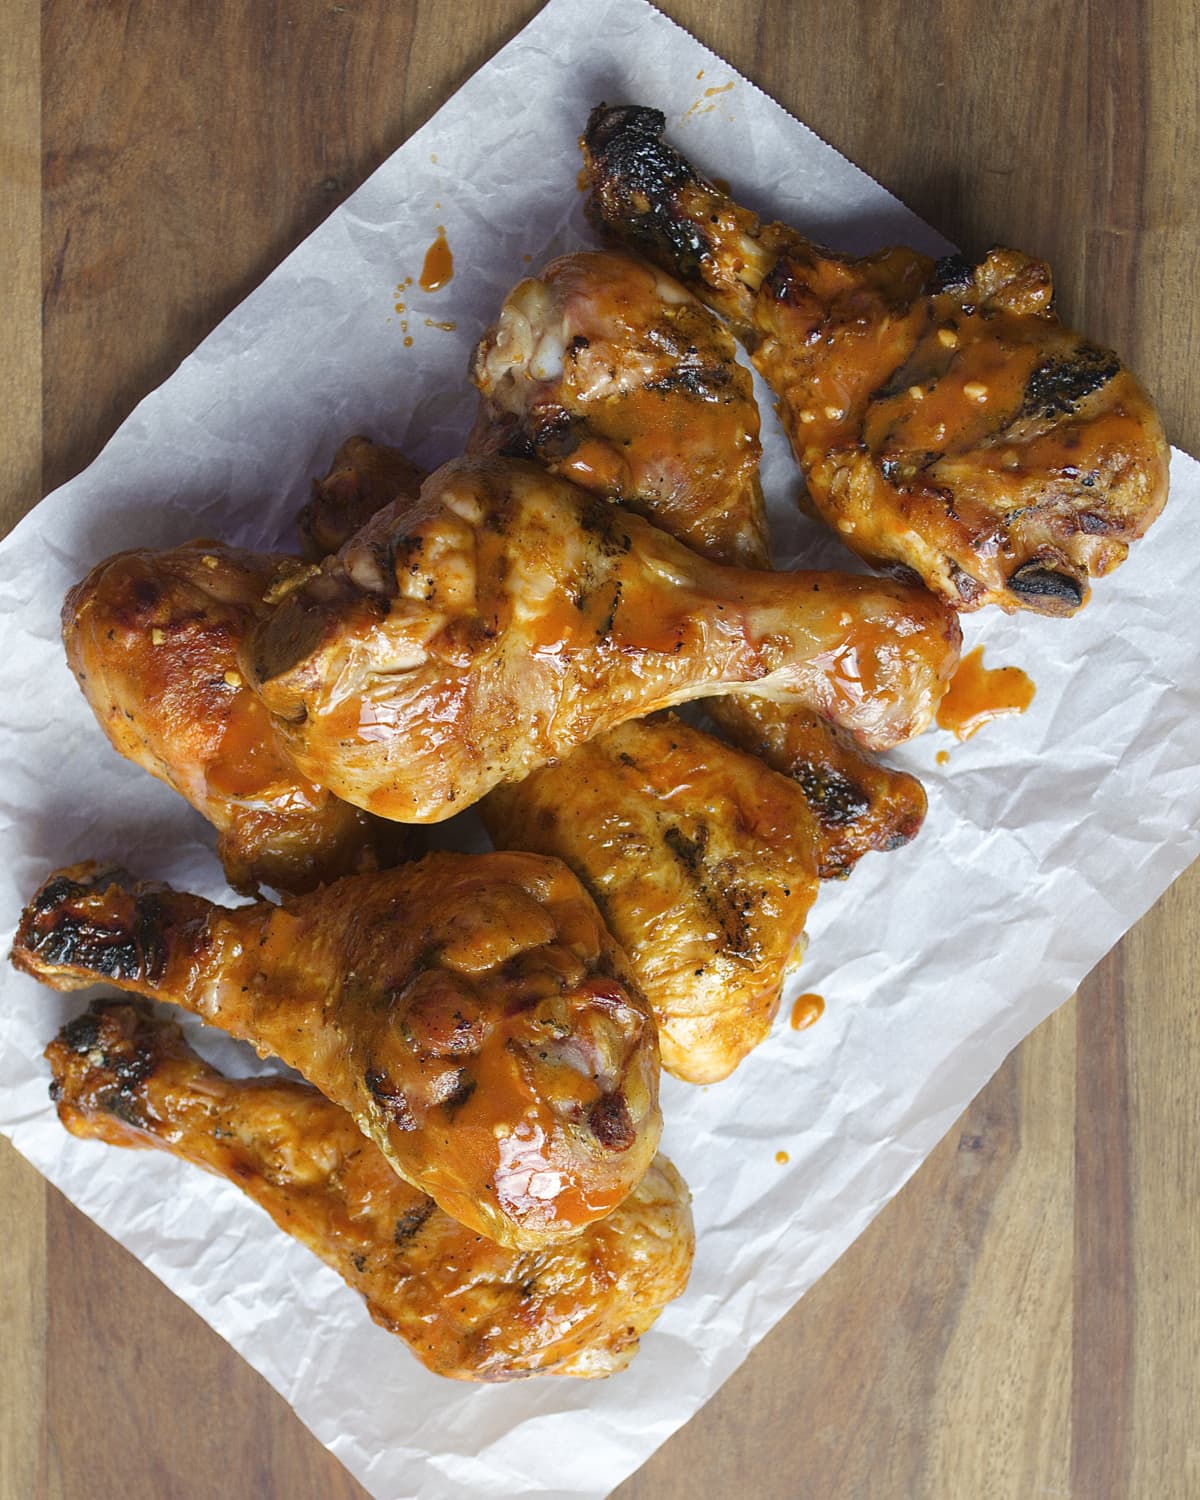 Drumsticks are smoked until they are perfectly tender then tossed in a tangy buffalo sauce! Ready in under 30 minutes!